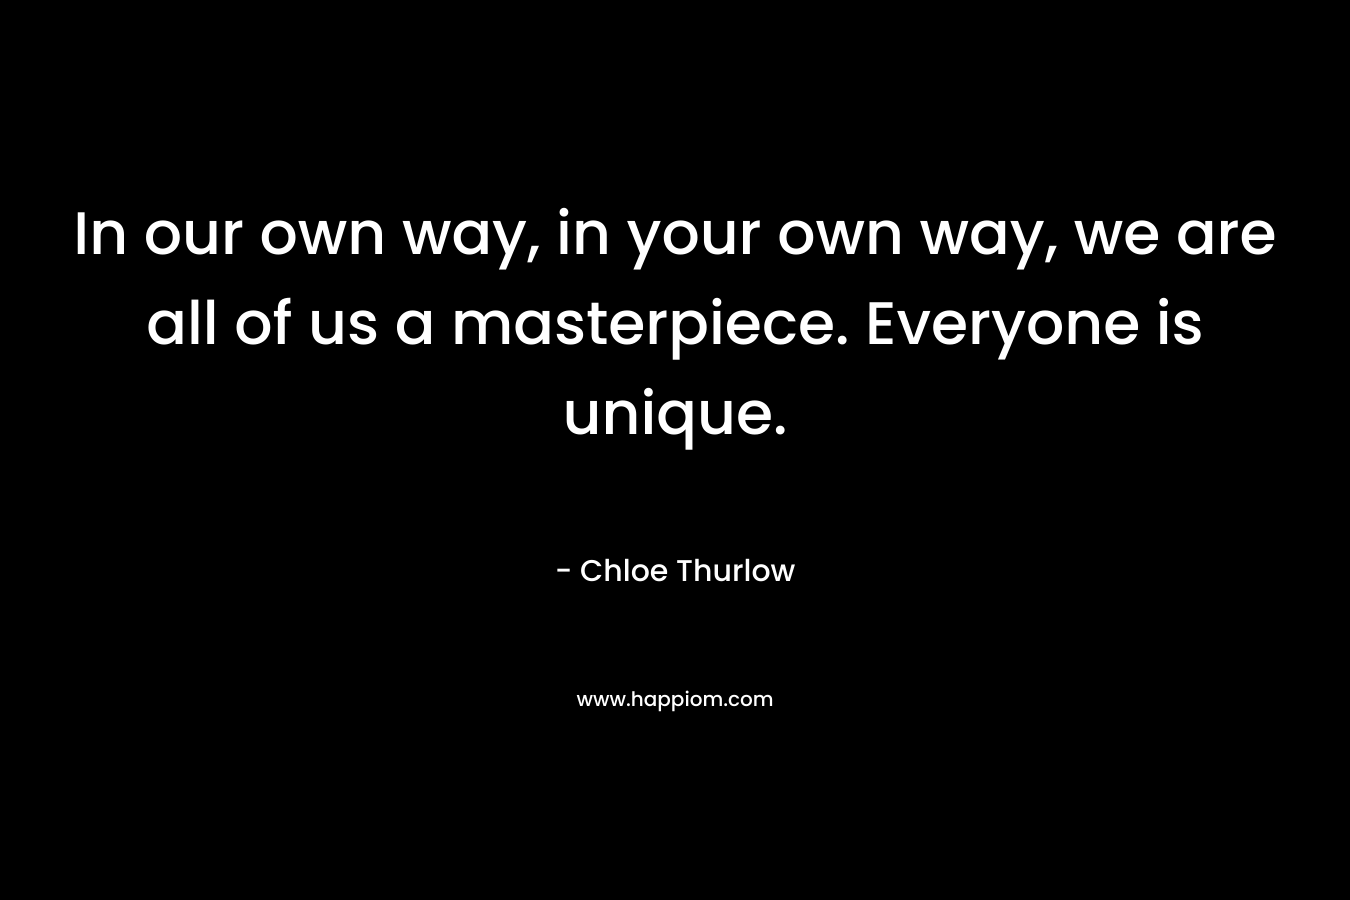 In our own way, in your own way, we are all of us a masterpiece. Everyone is unique. – Chloe Thurlow